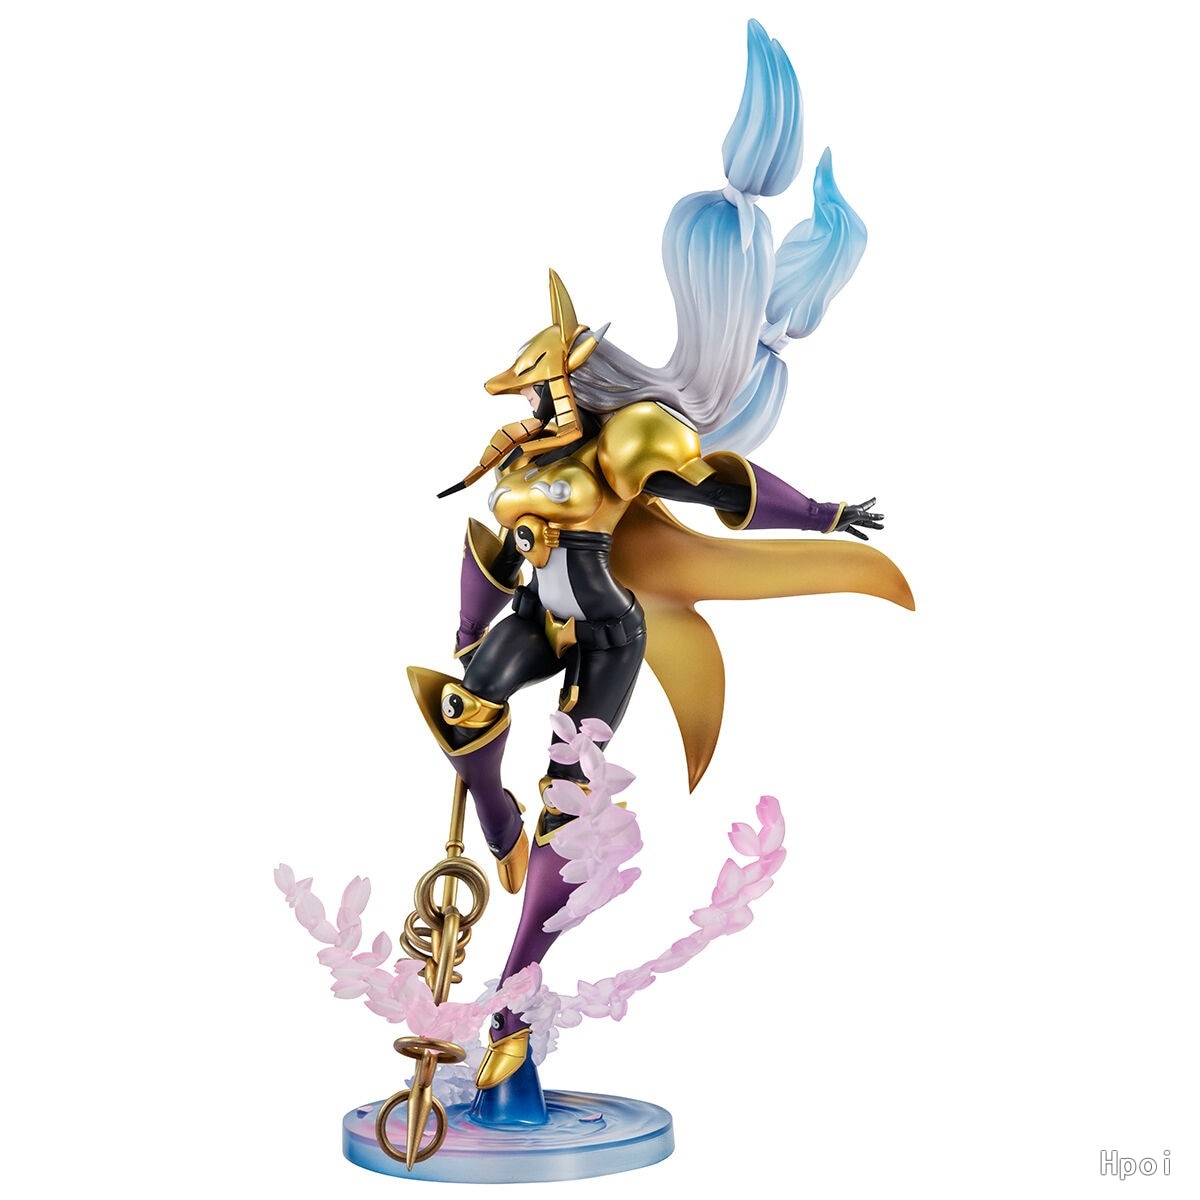 Behold the majestic Digimon figurine, embodying the essence of the iconic Digimon Tamers series. If you are looking for more Digimon Tamers Merch, We have it all! | Check out all our Anime Merch now!